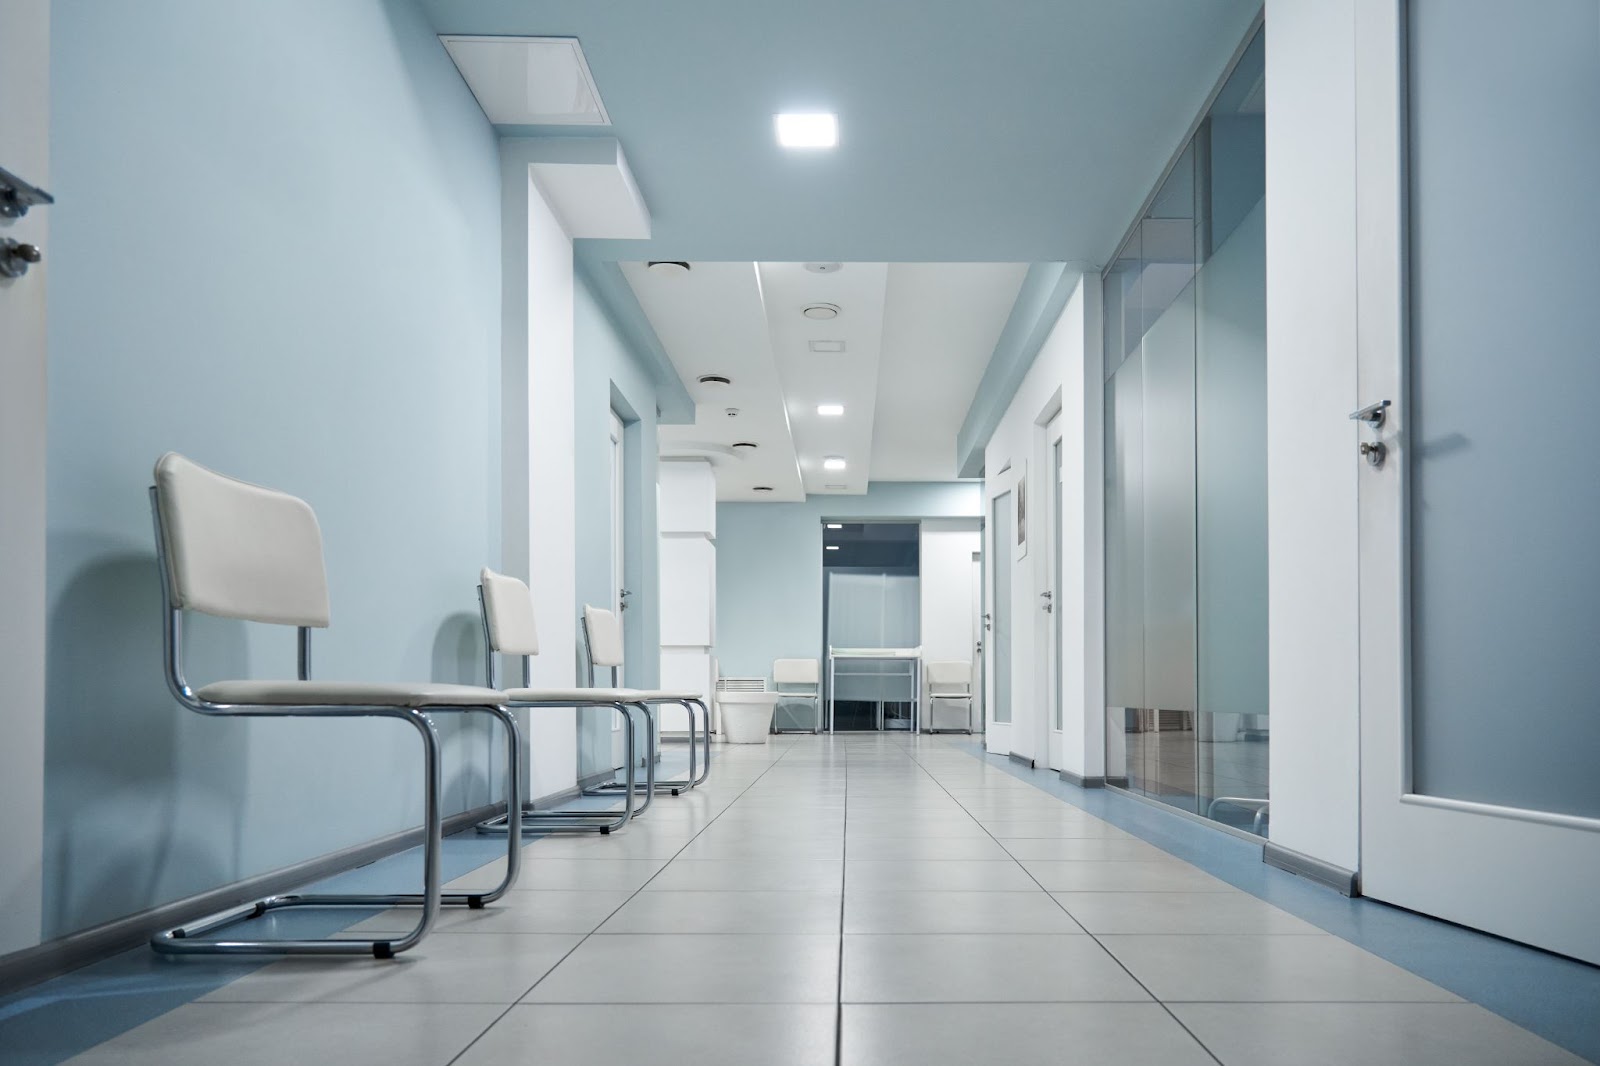  Healthcare and hospitals facilities need pure white light with high rendering index for color accuracy.